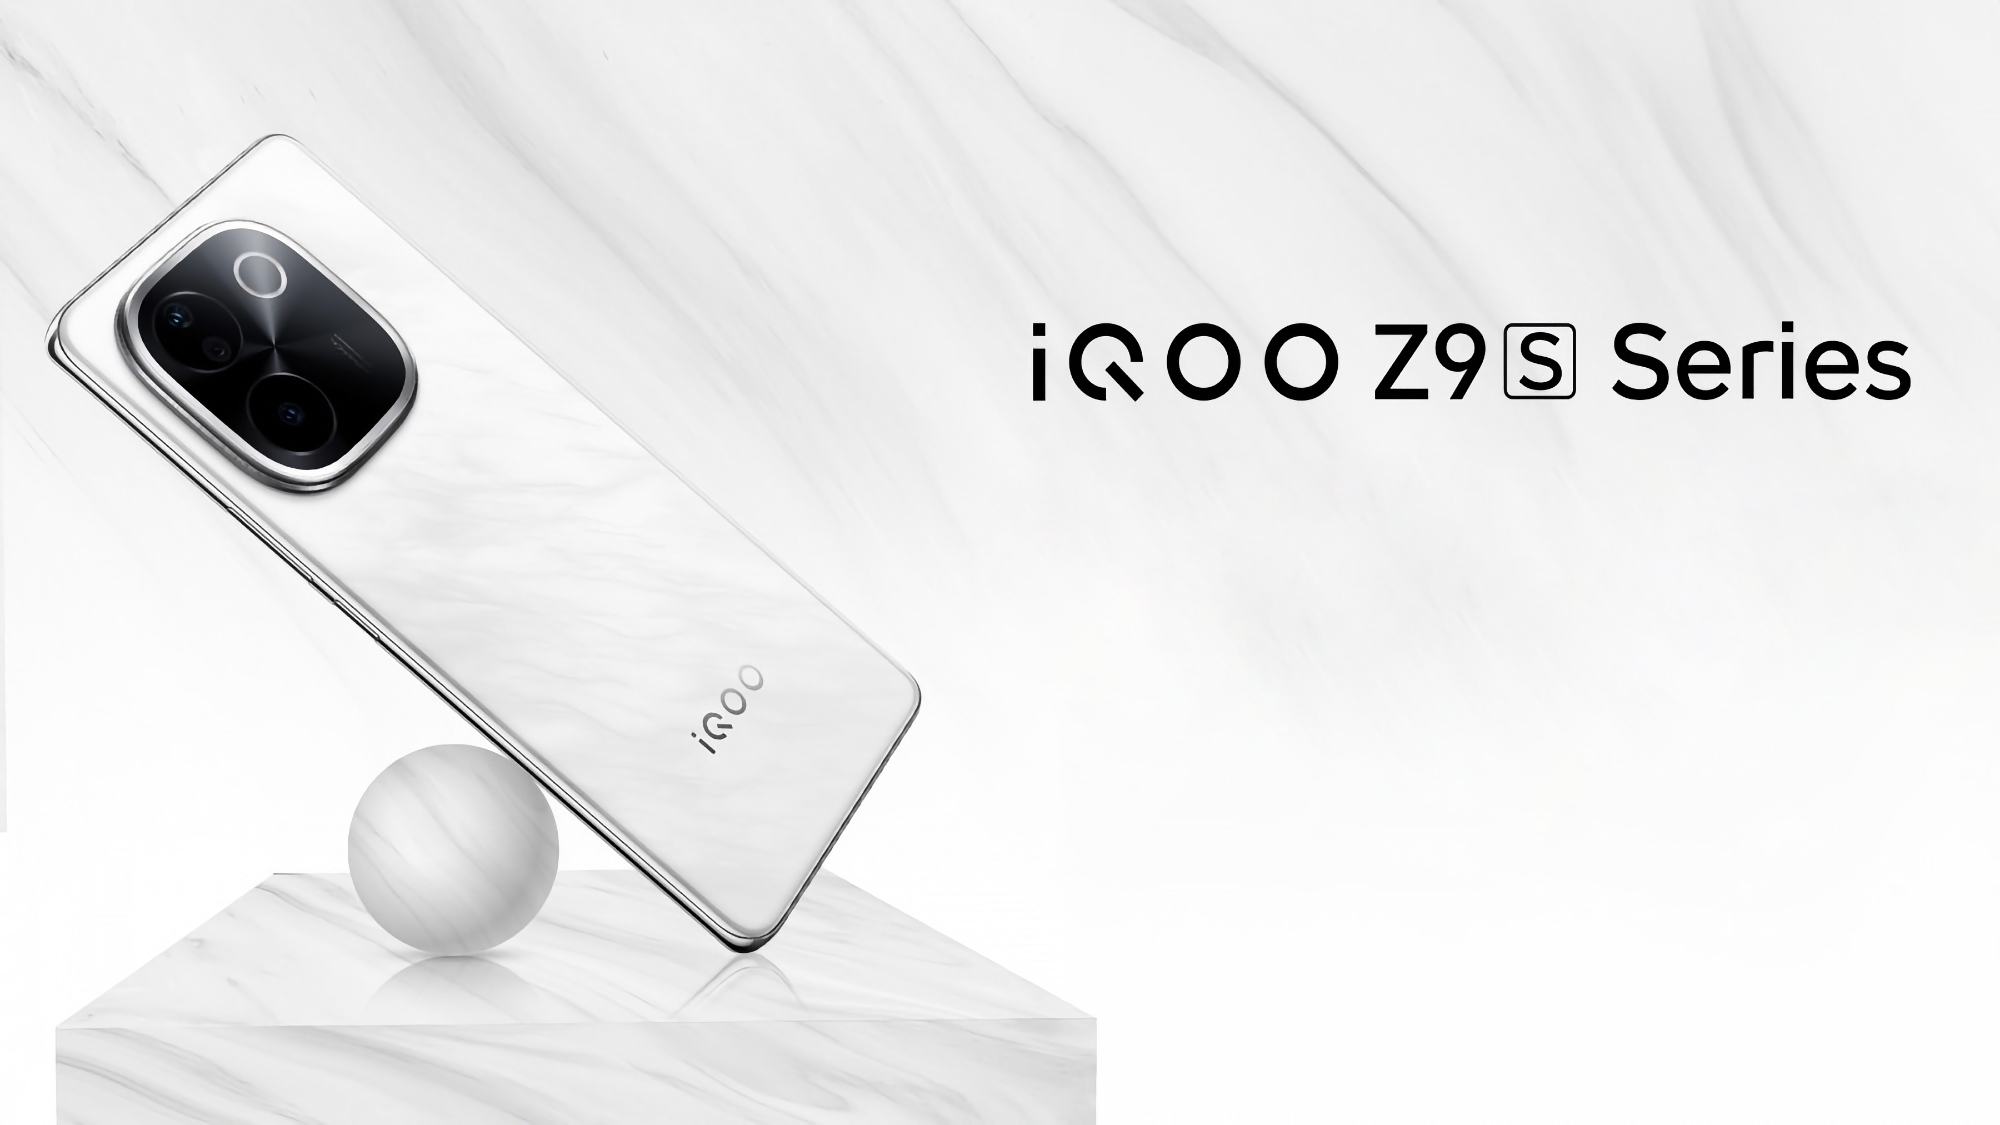 vivo to unveil iQOO Z9s smartphone line-up at launch on 4 August